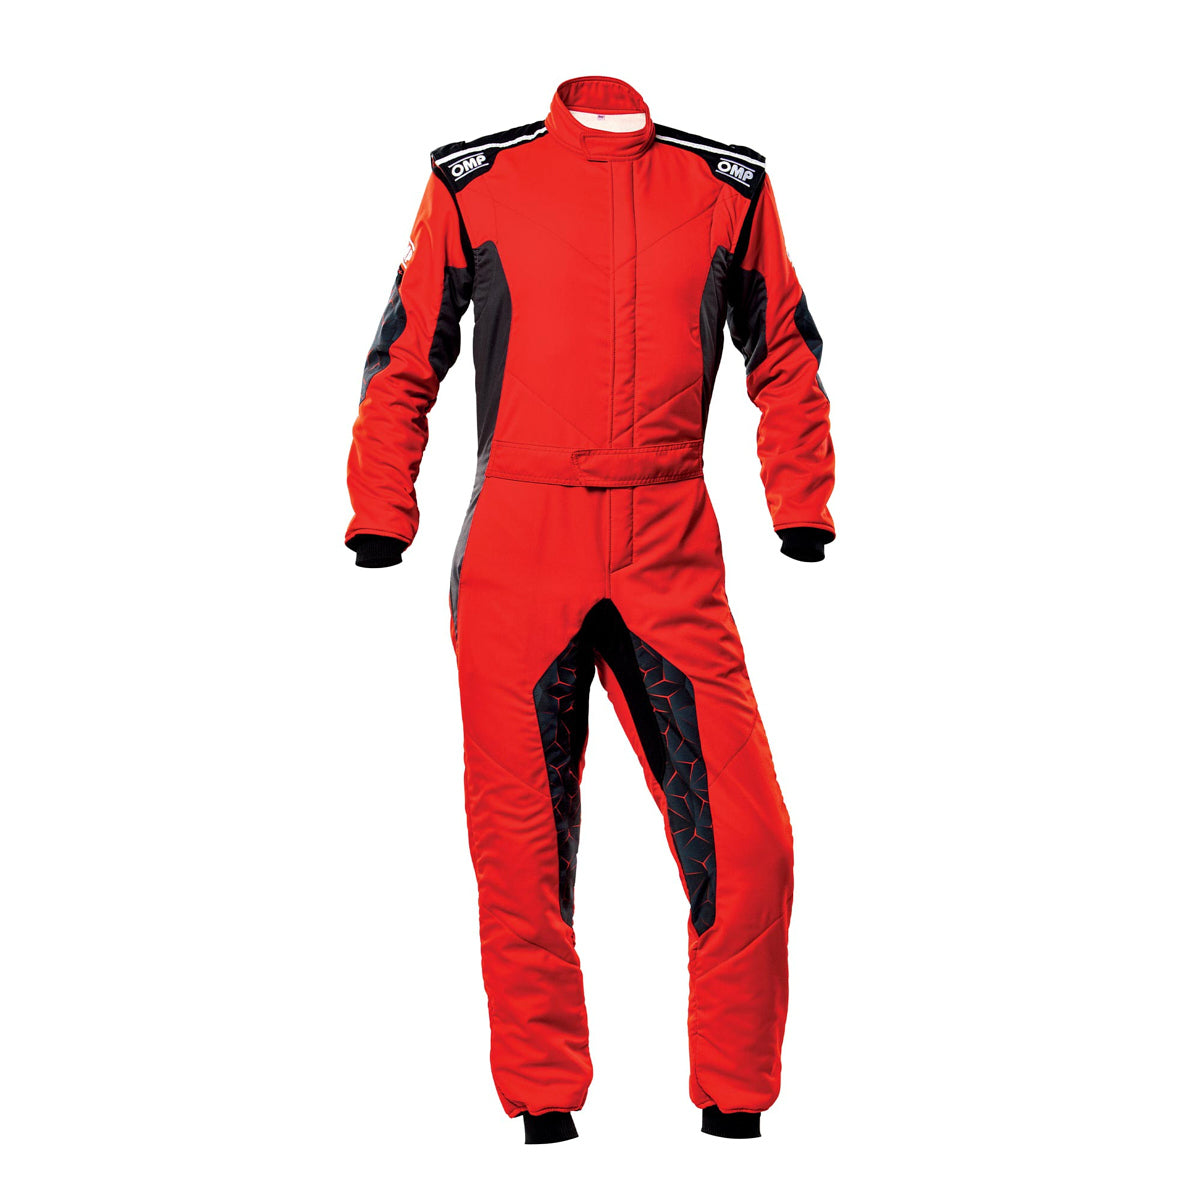 Tecnica Hybrid Suit Red and Black Size 60